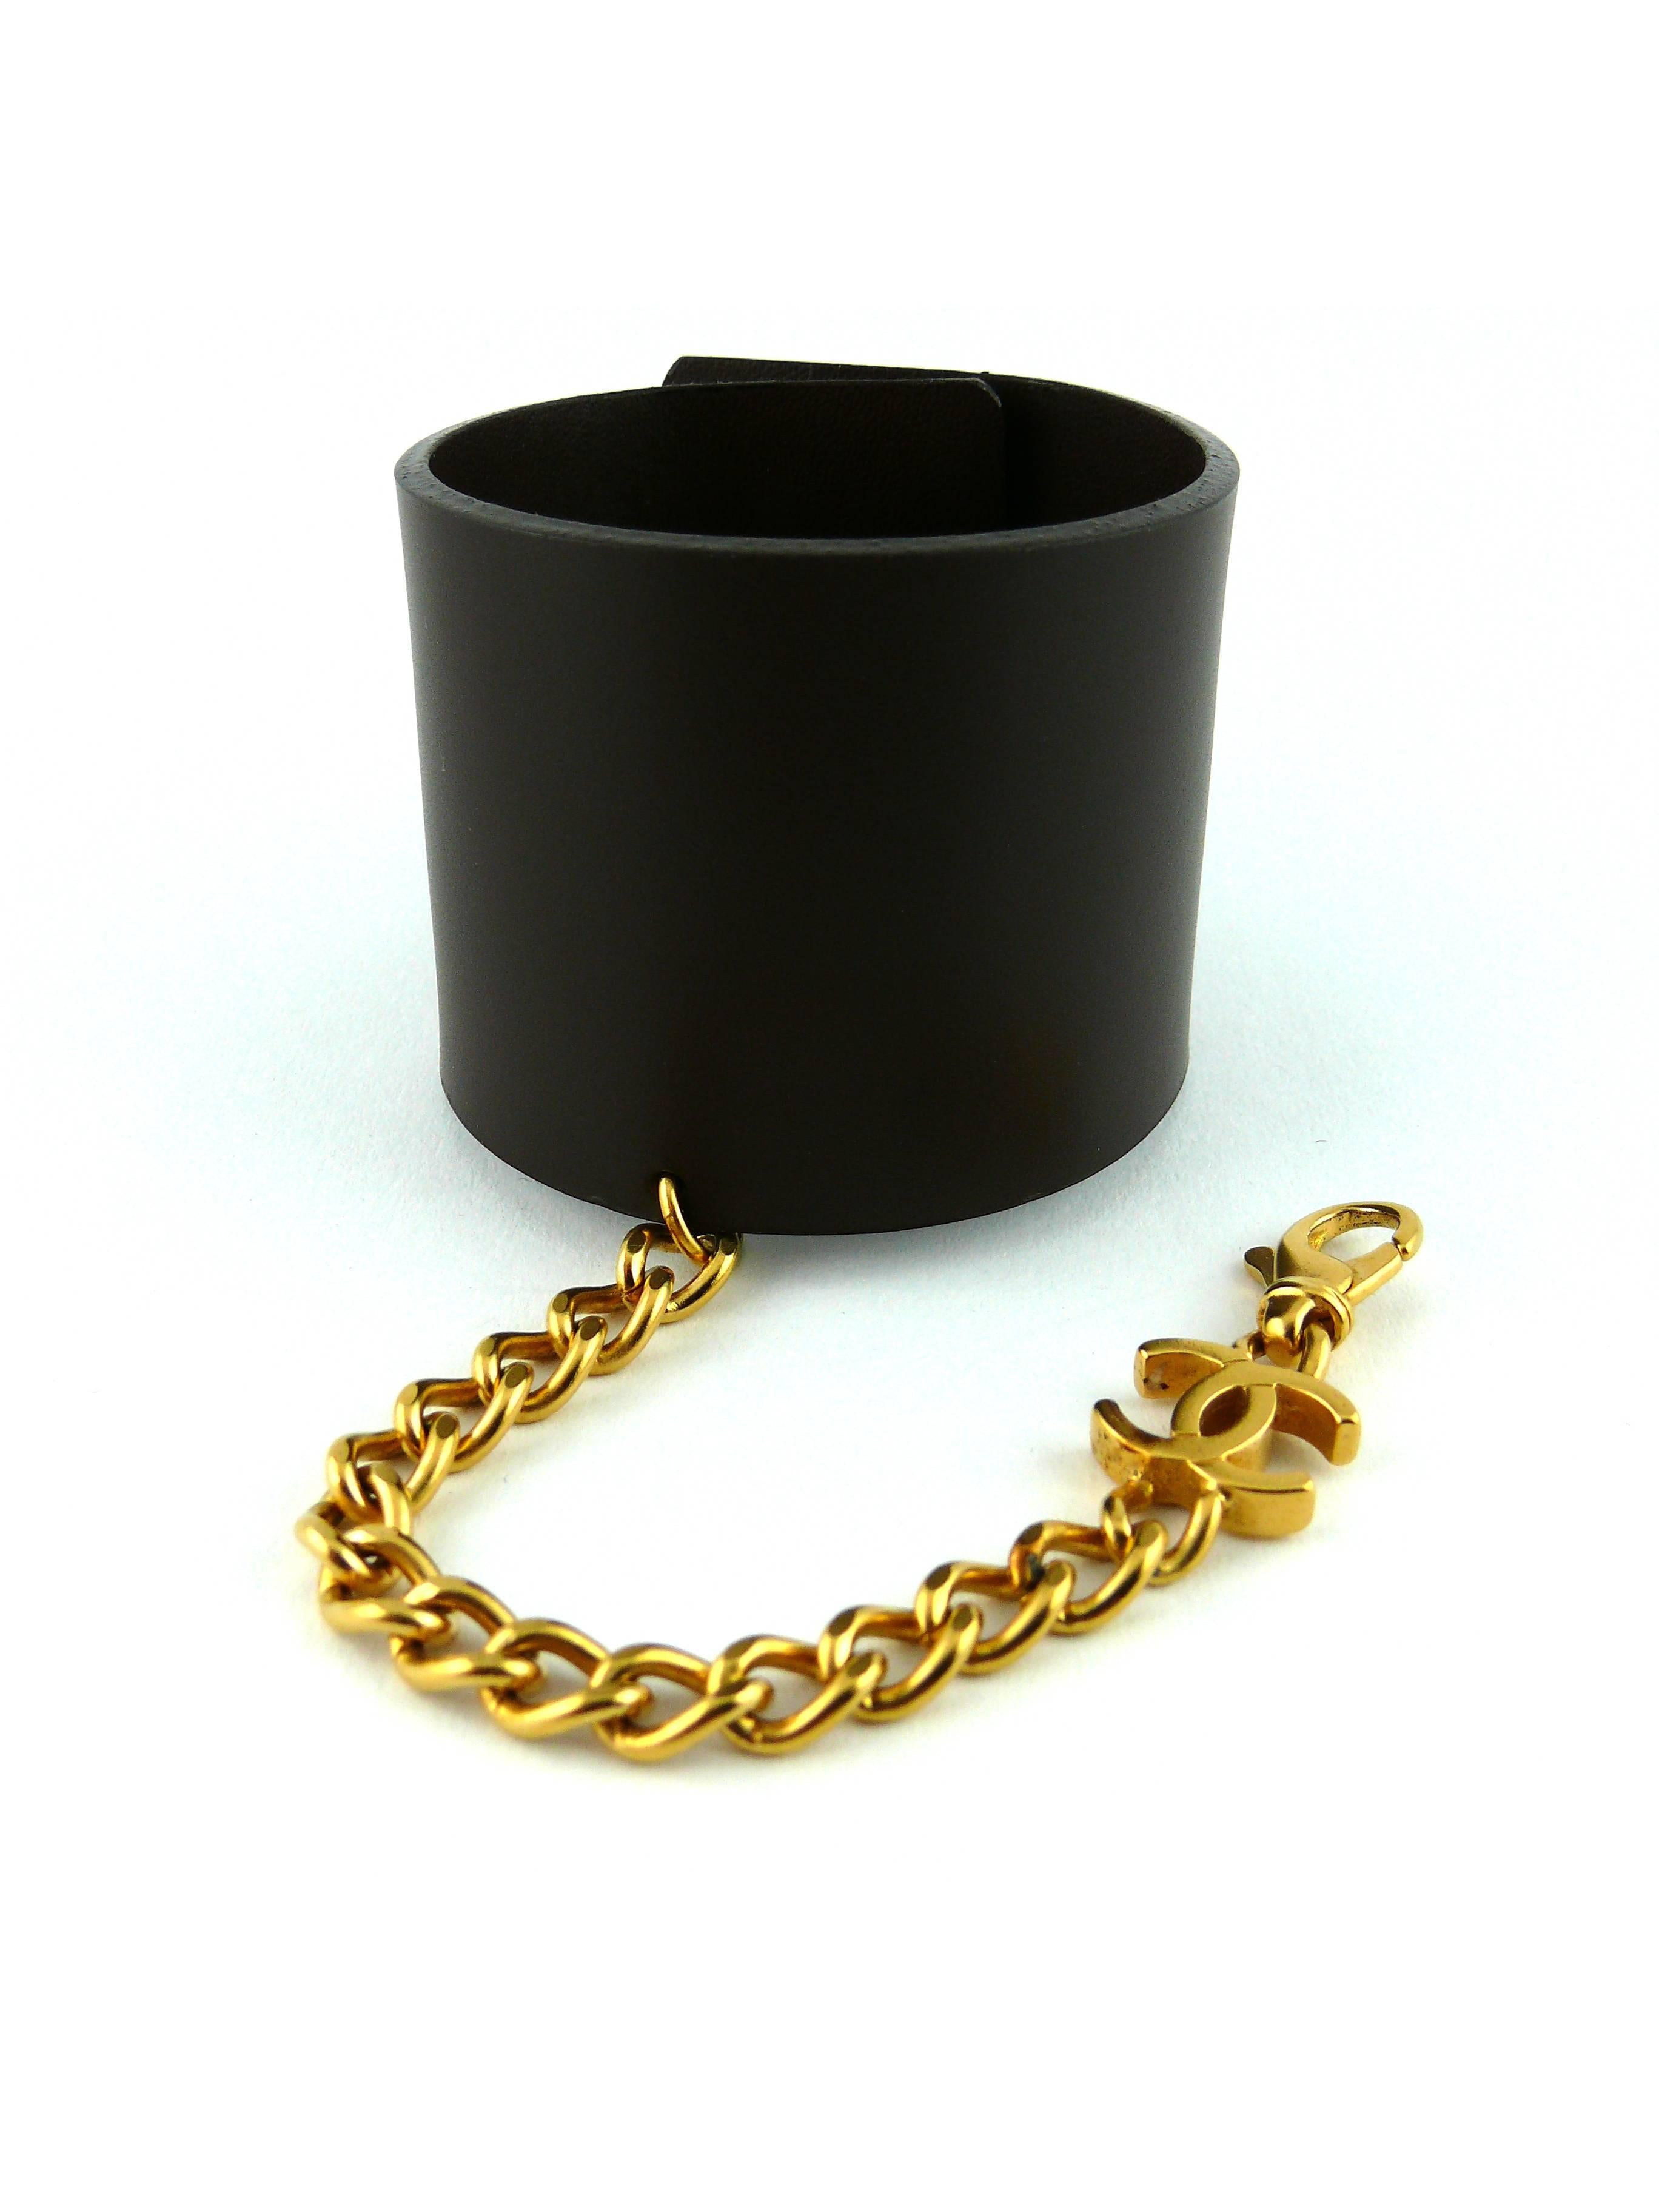 Chanel ID Tag and Chain Brown Leather Cuff Bracelet Spring 2003 2